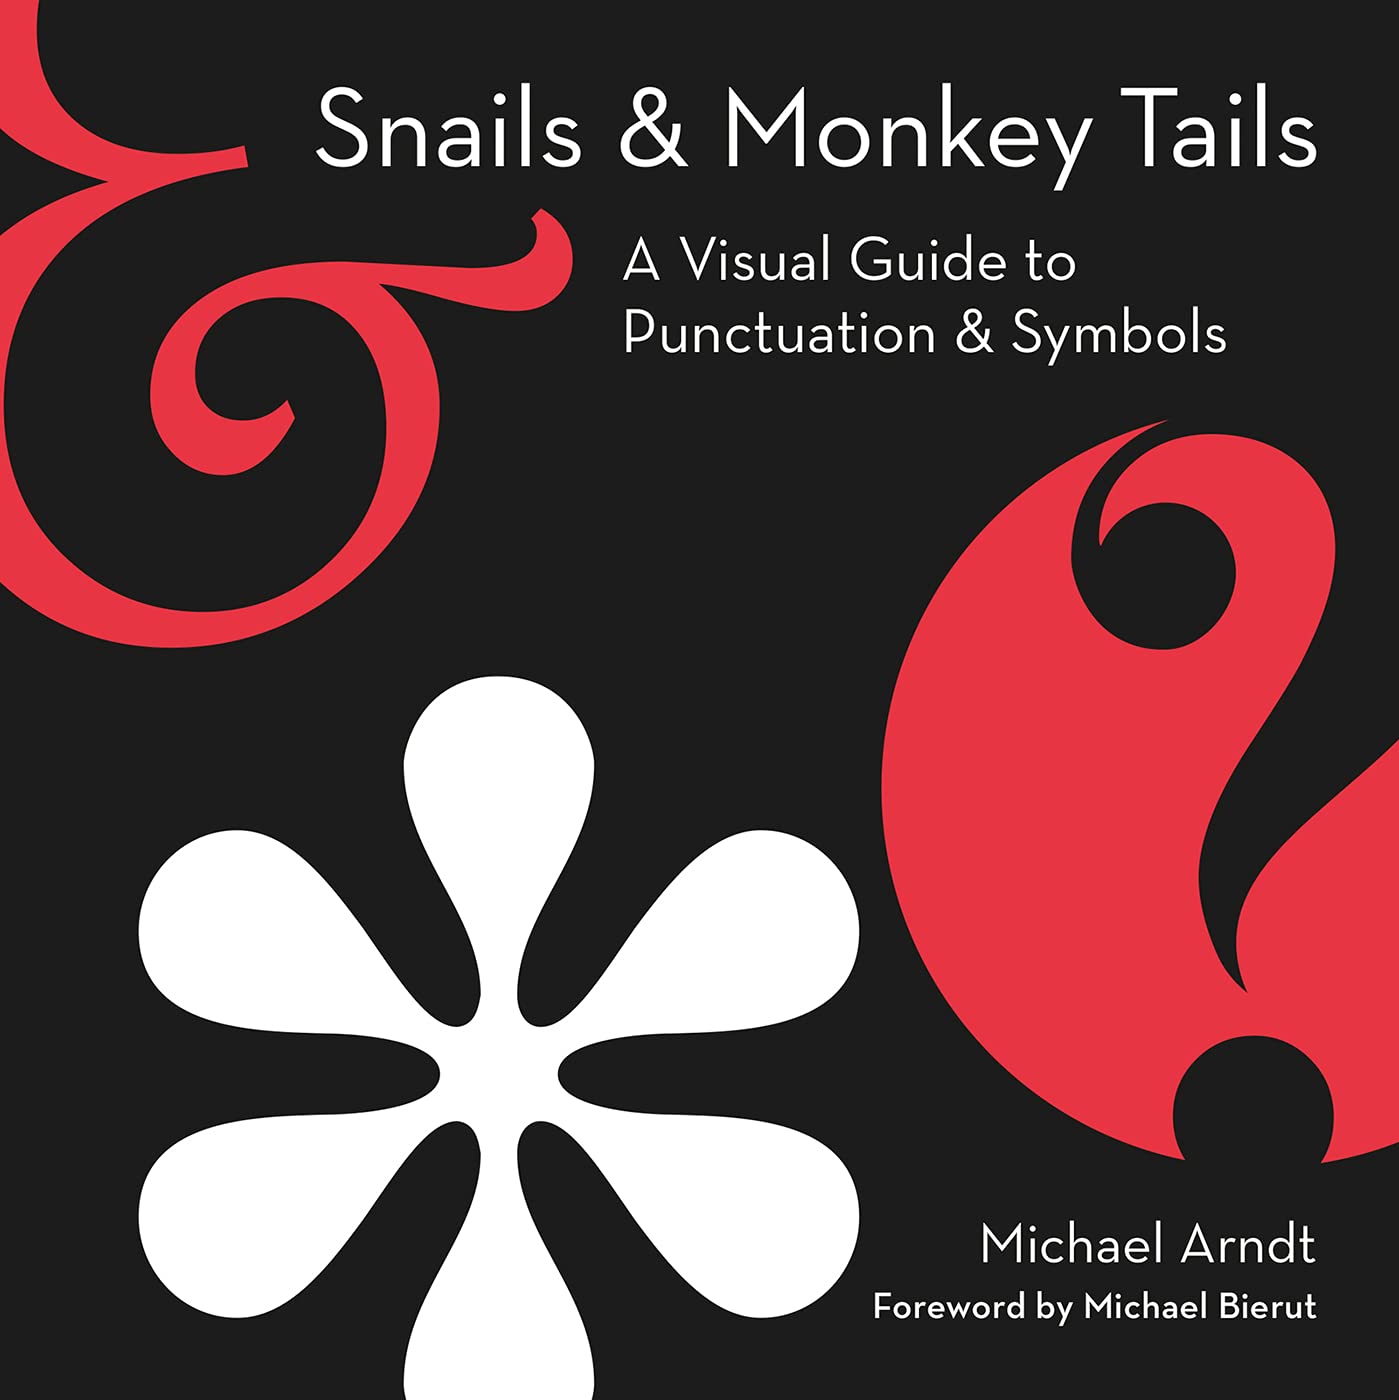 Snails & Monkey Tails: A Visual Guide to Punctuation & Symbols (Hardcover)